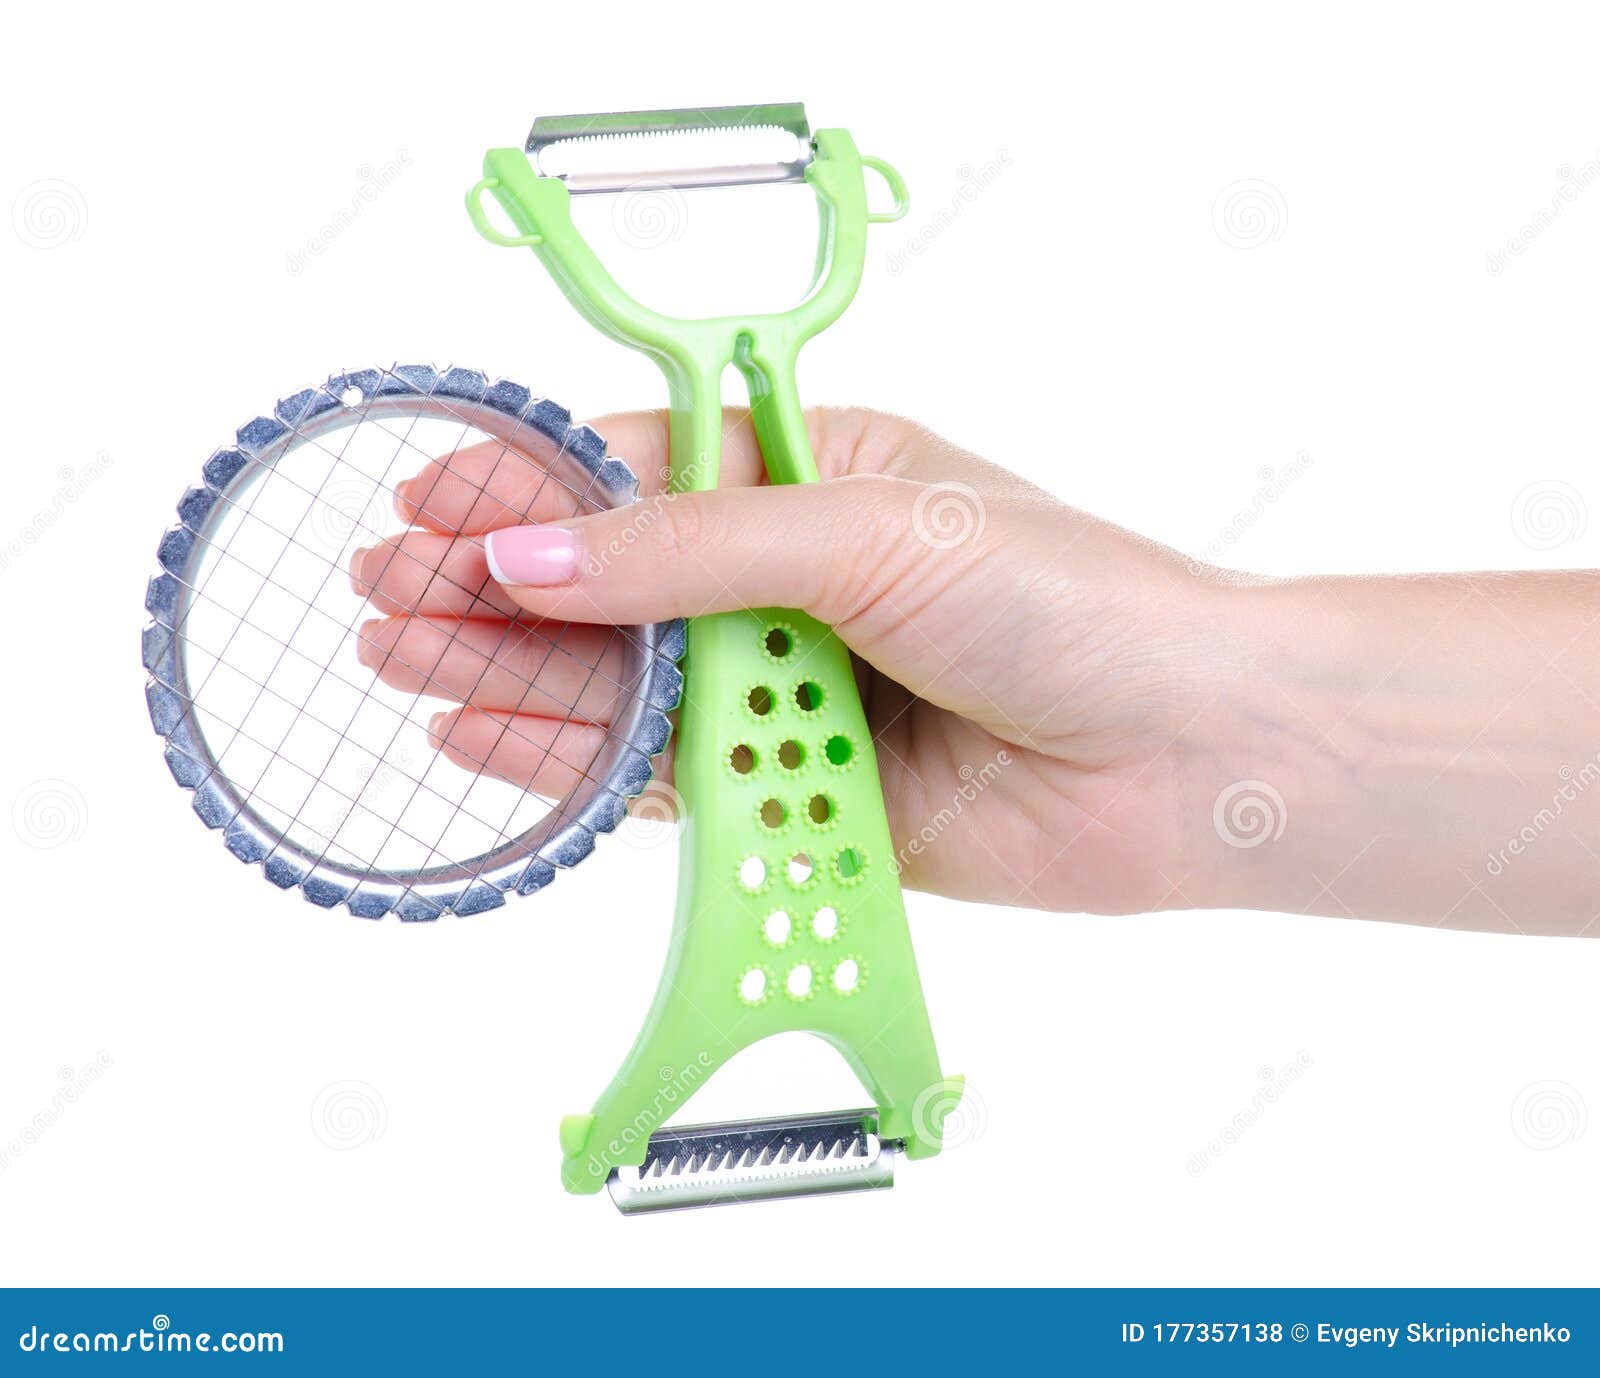 Peeler for Vegetables and Metal Grid Vegetable Cutter in Hand